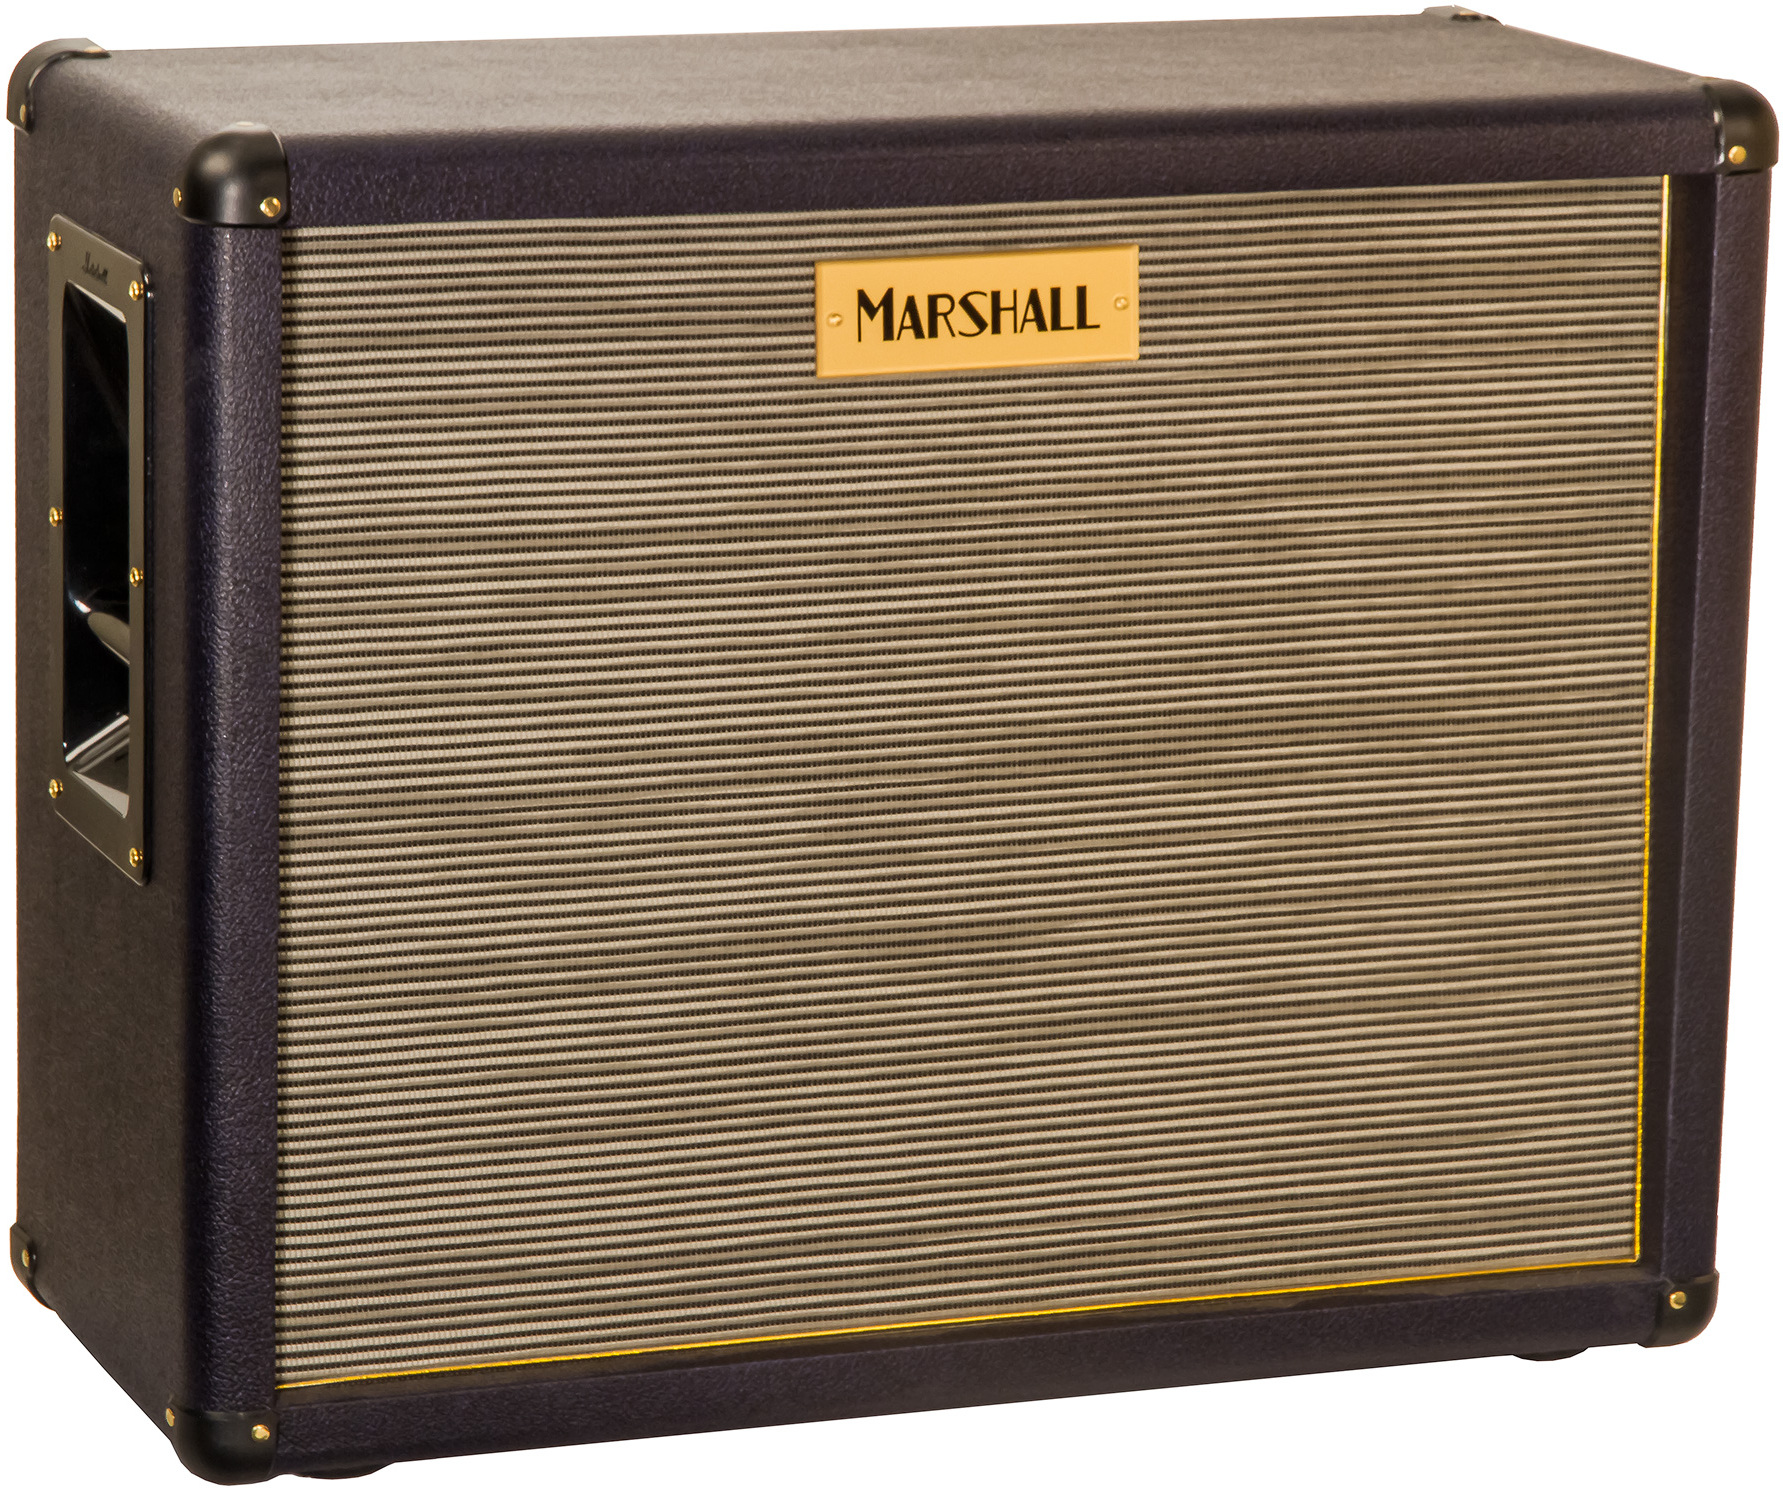 Marshall 1936gd7 Guitar Cab Ltd 2x12 150w 8/16-ohms Stereo Horizontal Purple Black Levant - Electric guitar amp cabinet - Main picture